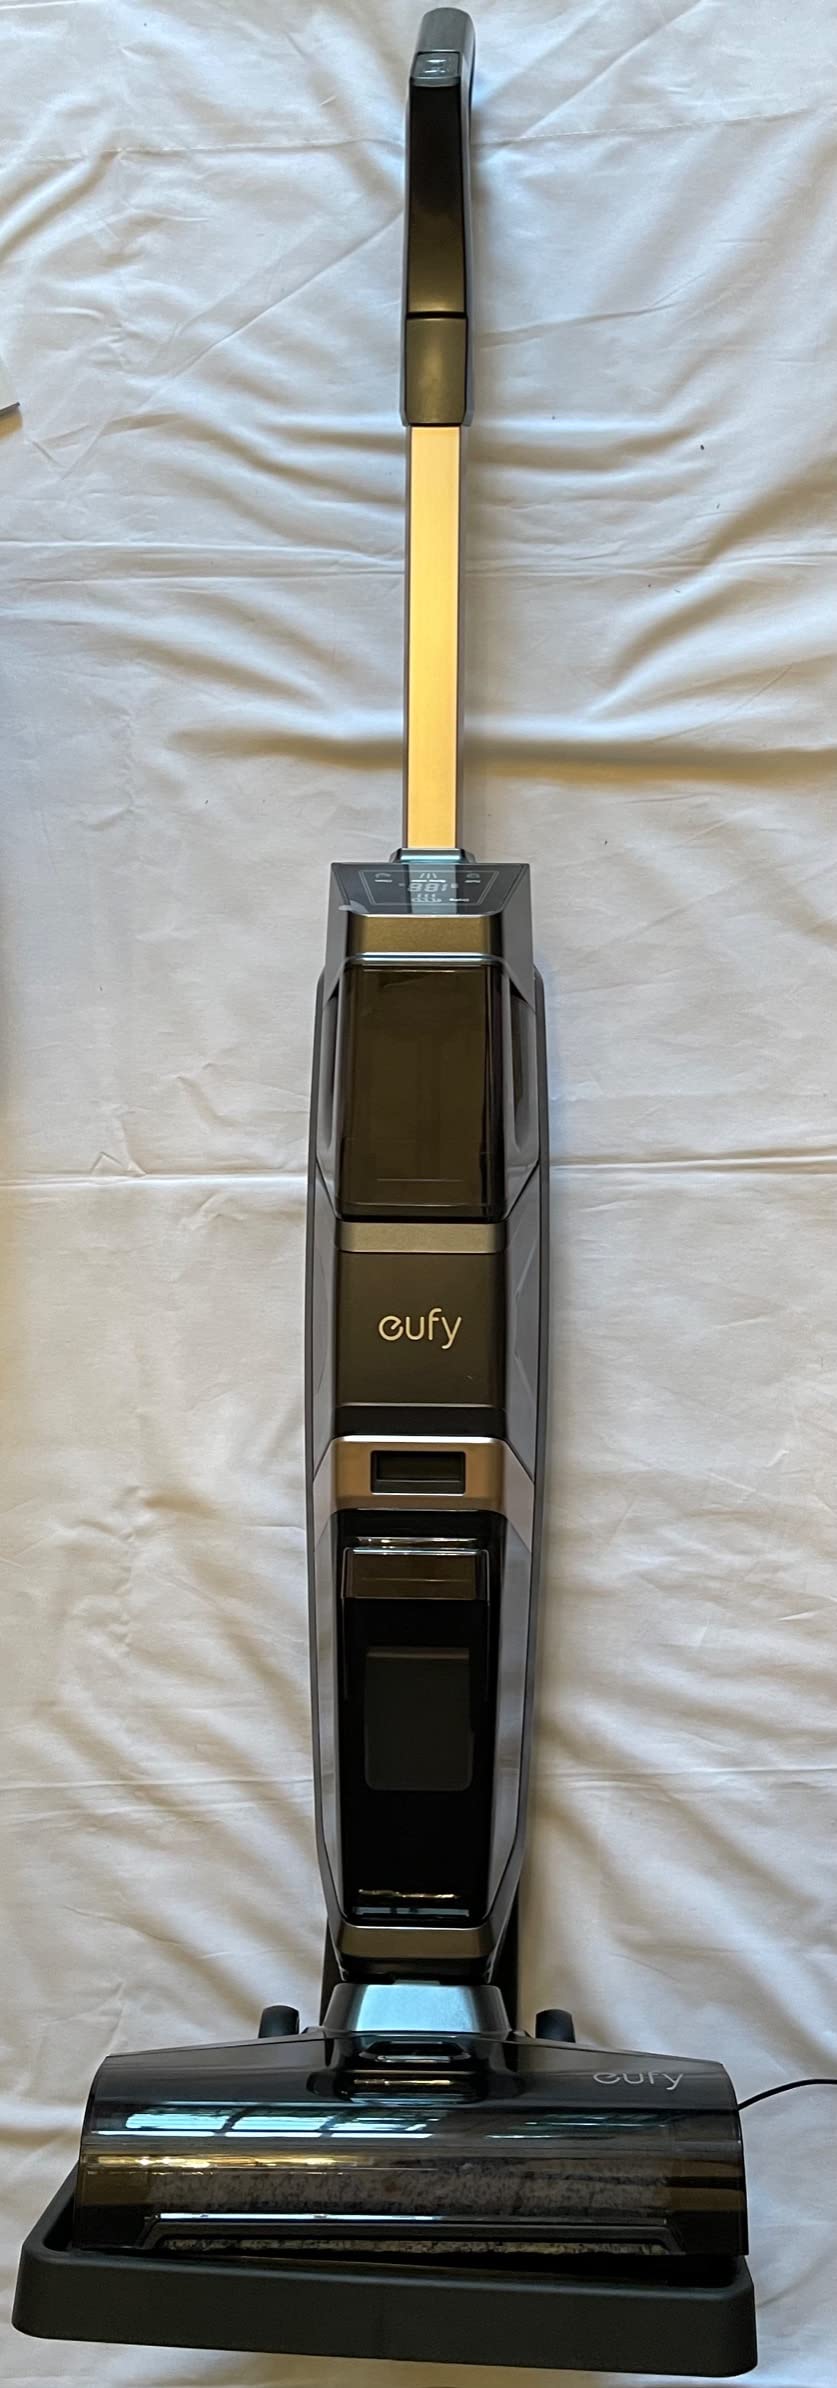  Eufy by Anker wetvac cordless cleaner w31